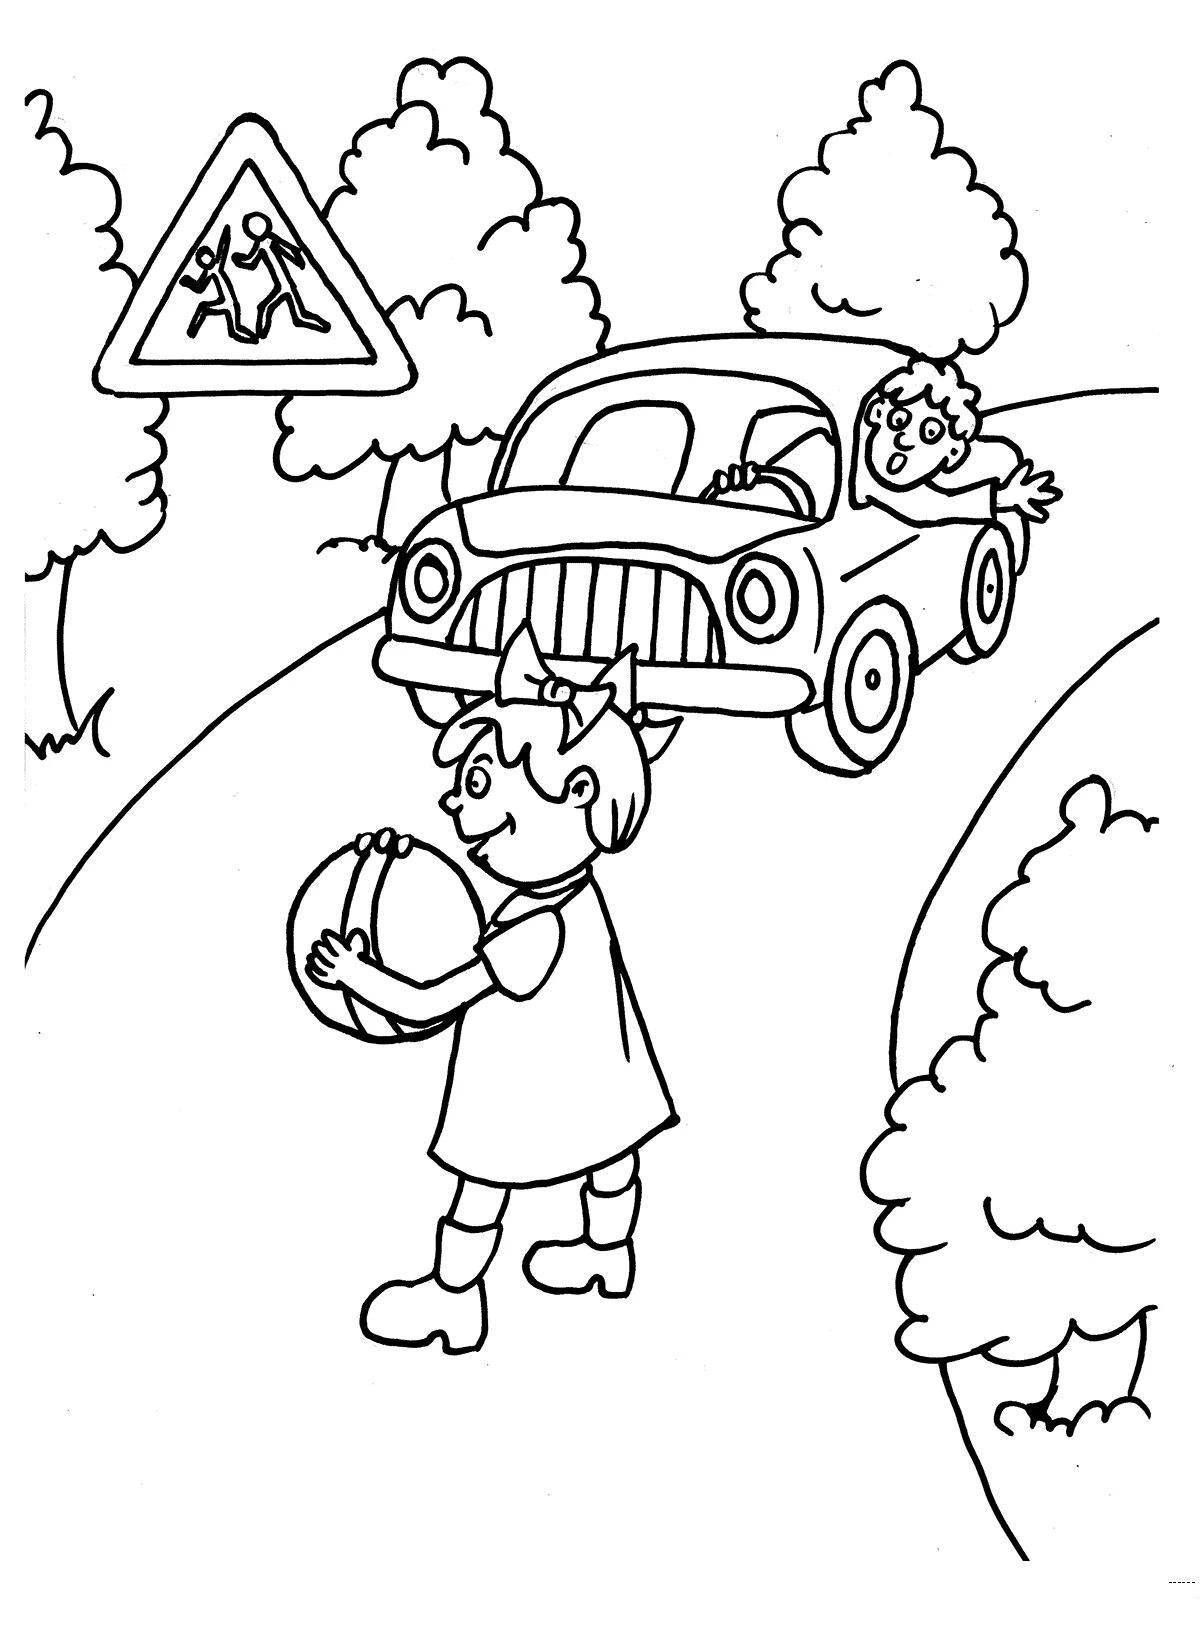 Fun safety rules coloring book